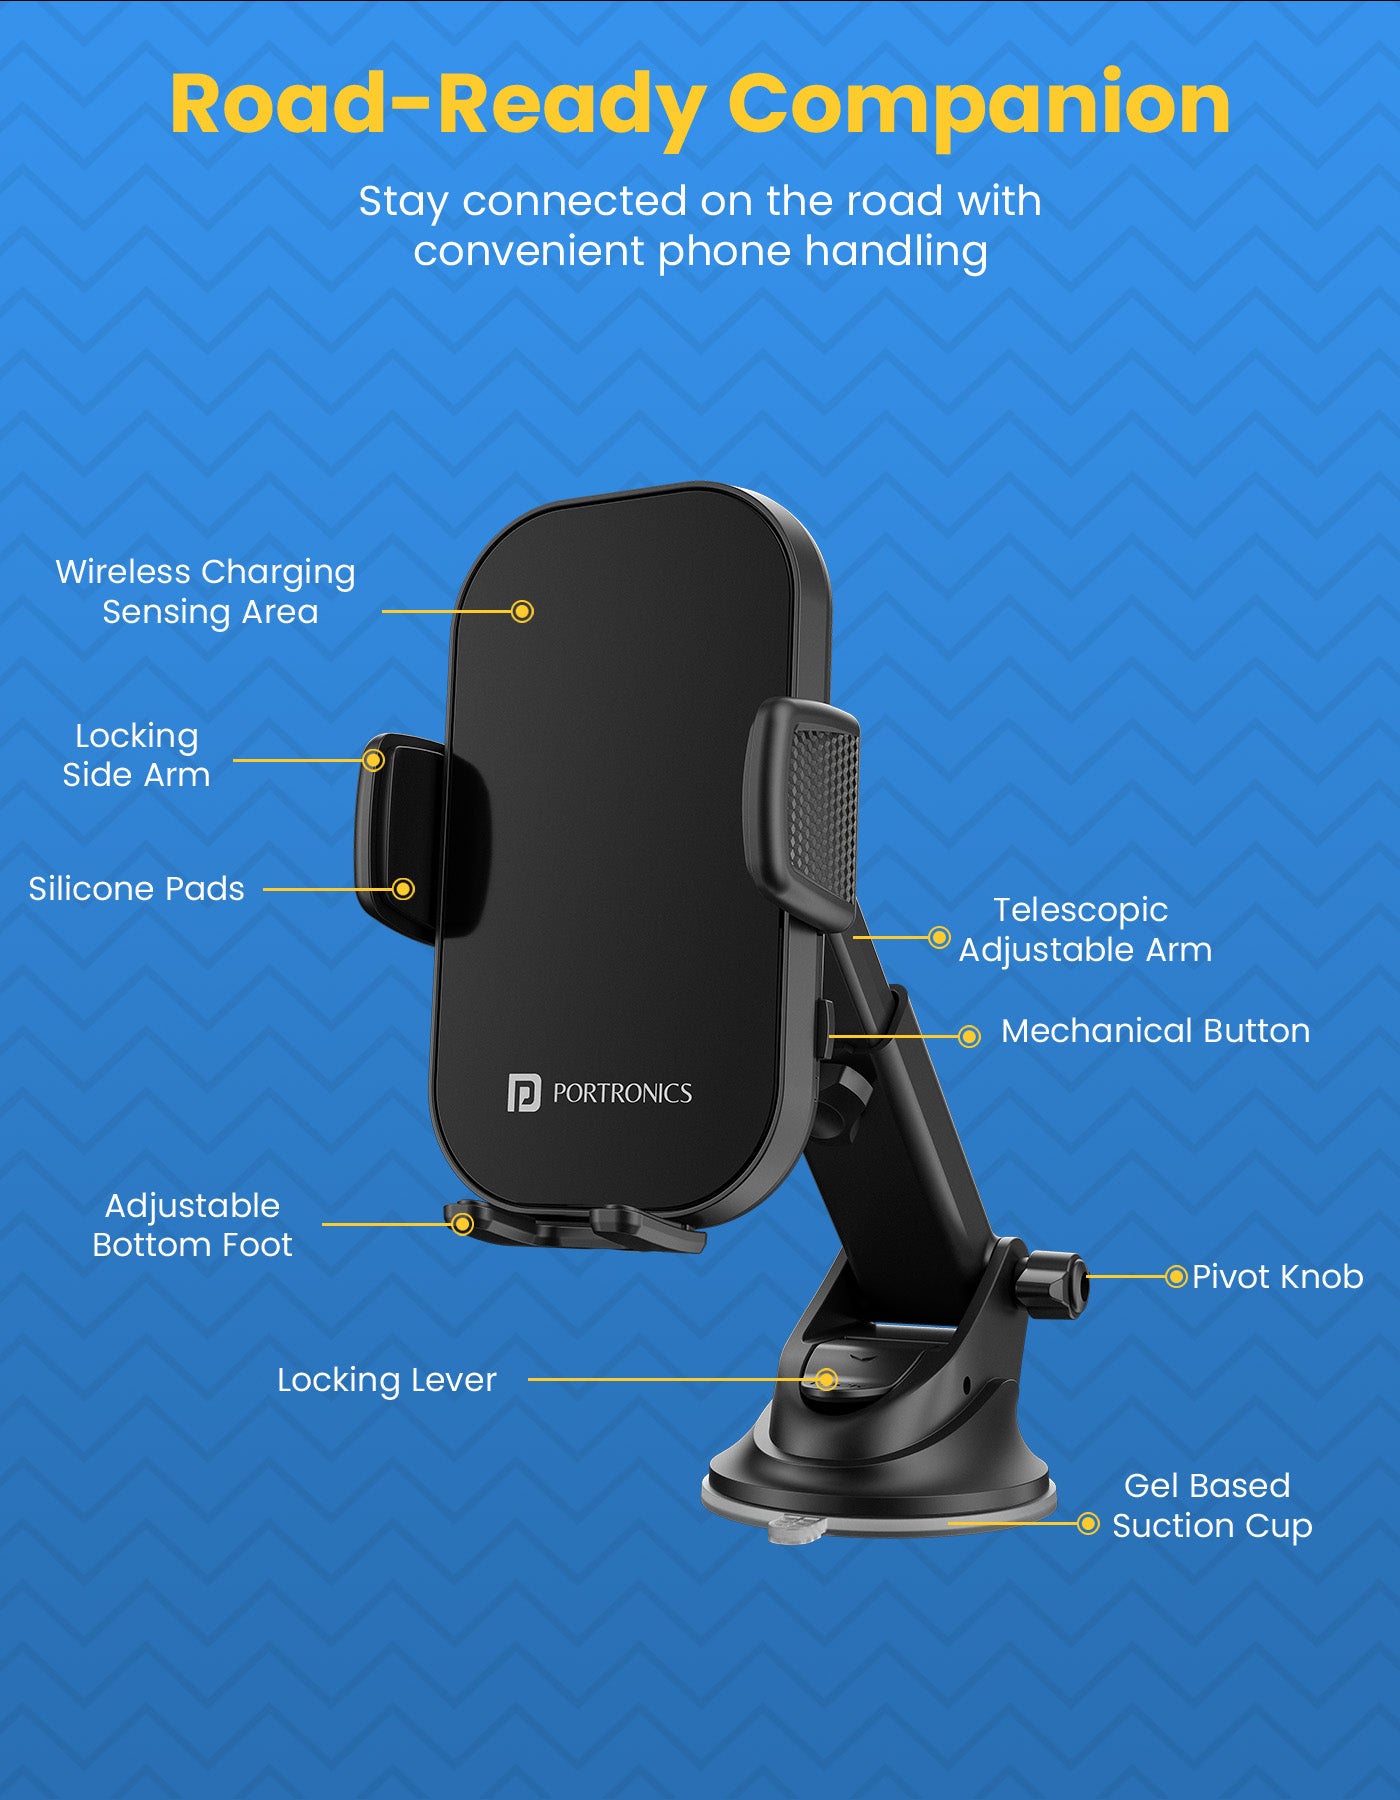 Portronics Clamp 3 smartphone holder has multiple features